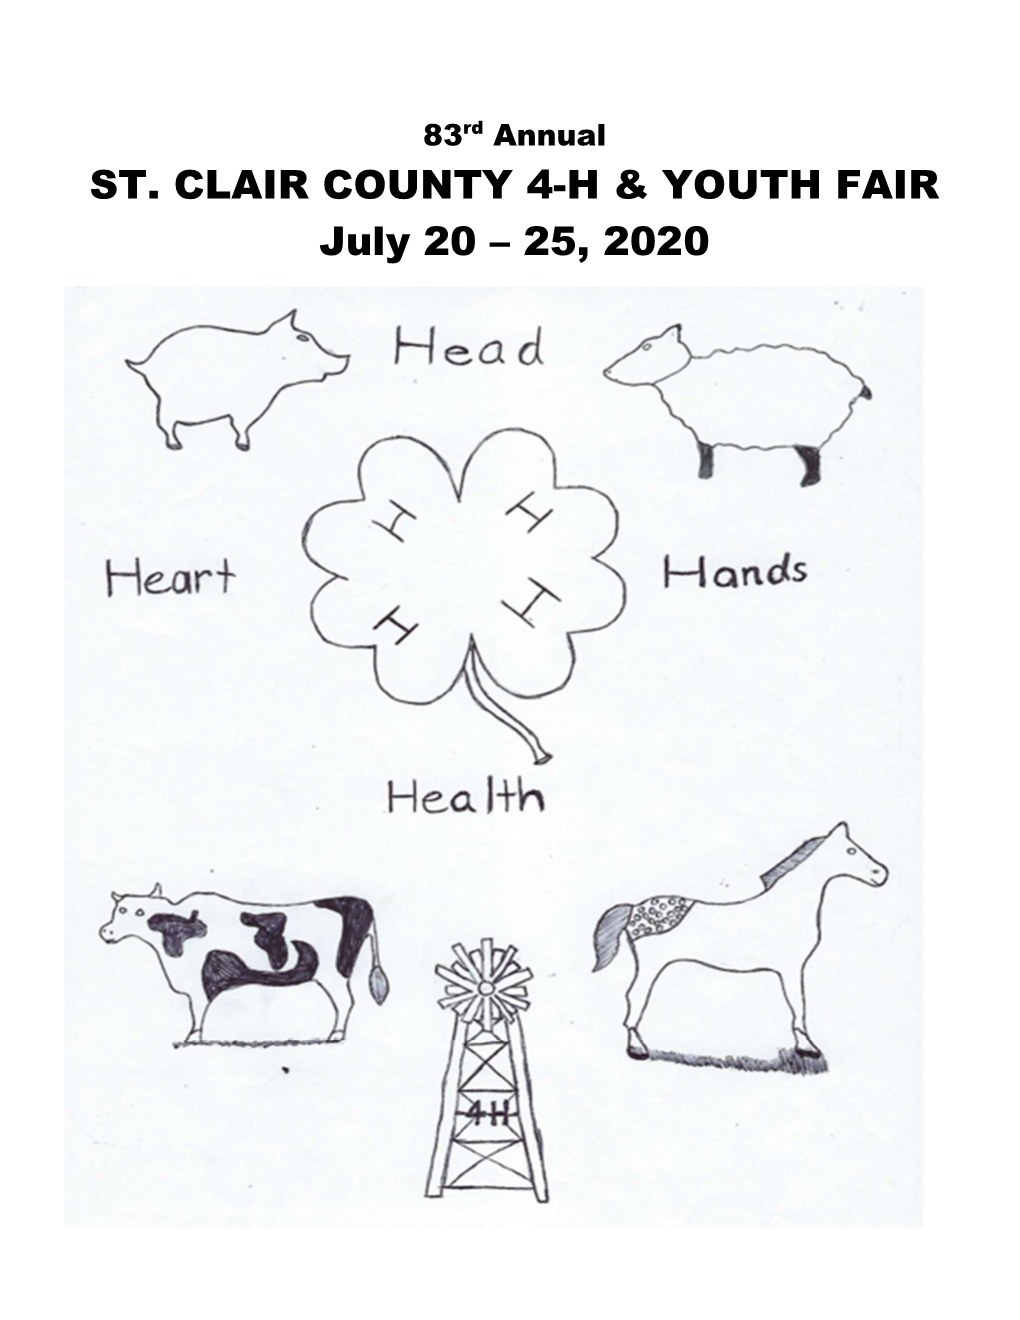 ST. CLAIR COUNTY 4-H & YOUTH FAIR July 20 – 25, 2020